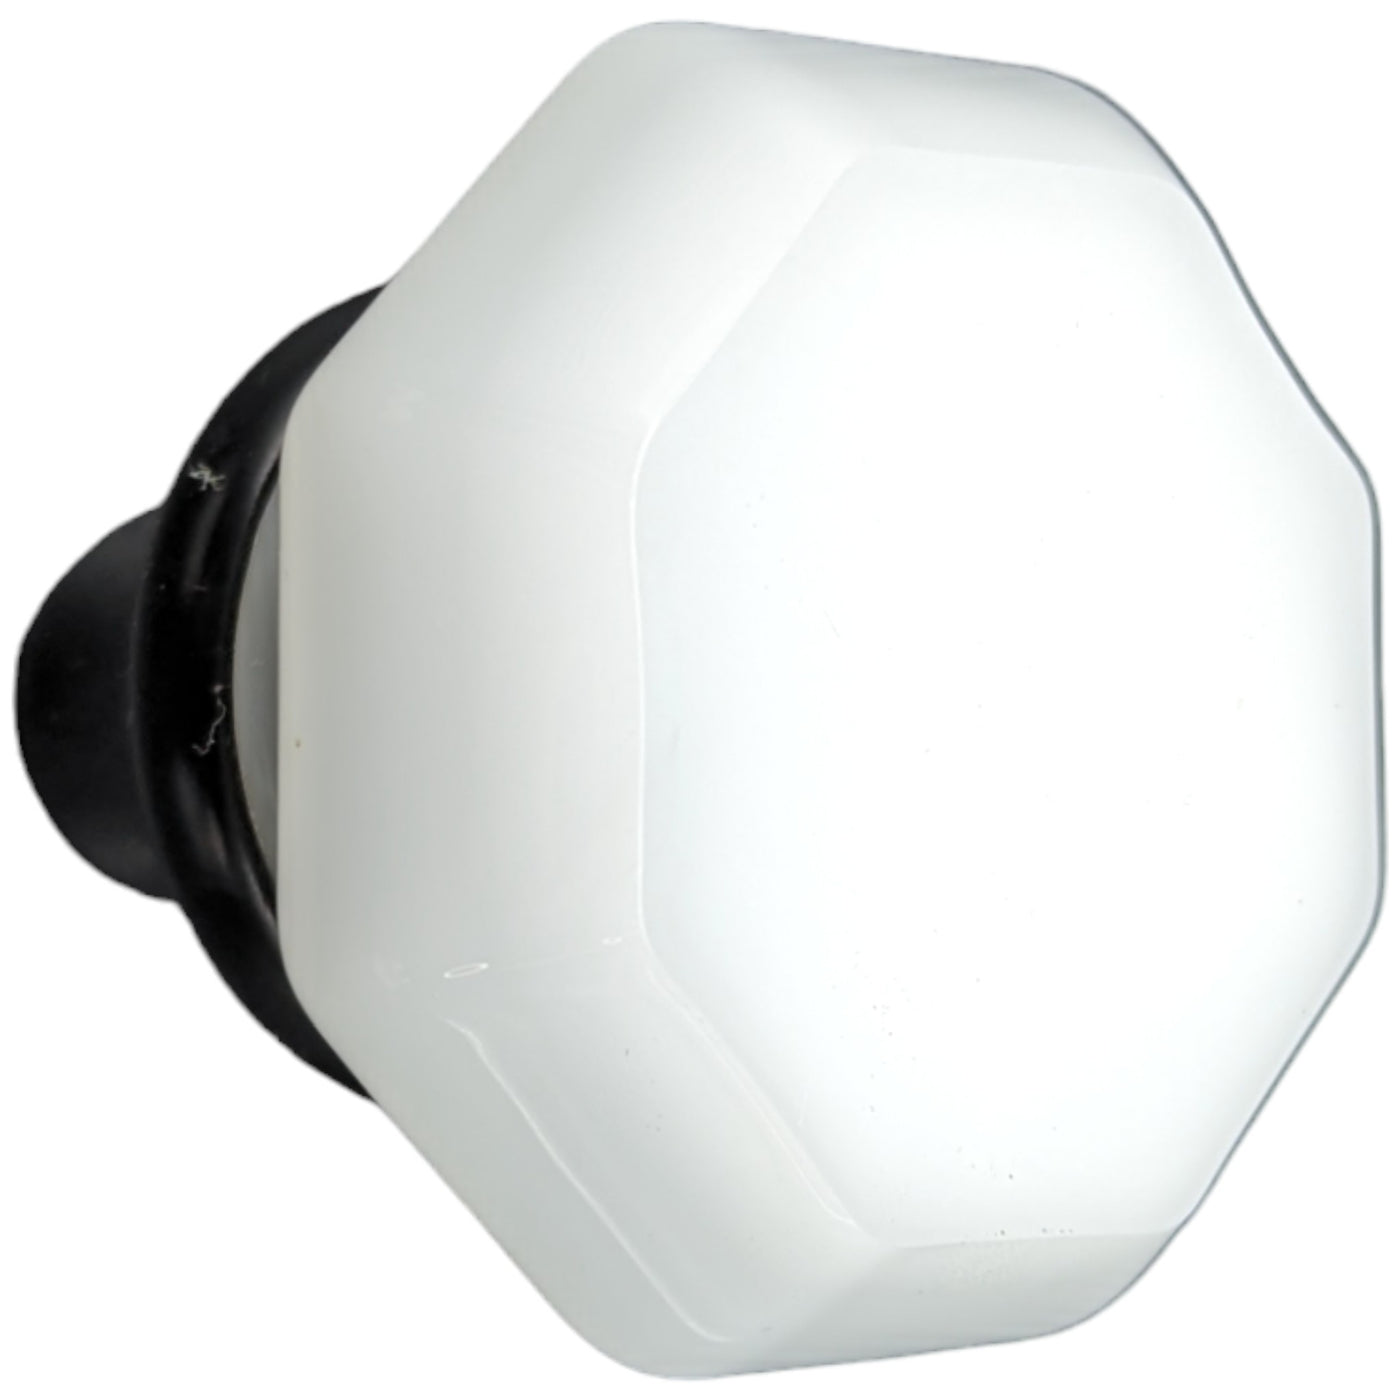 Octagon Milk Glass Spare Door Knob Set (Several Finishes Available)